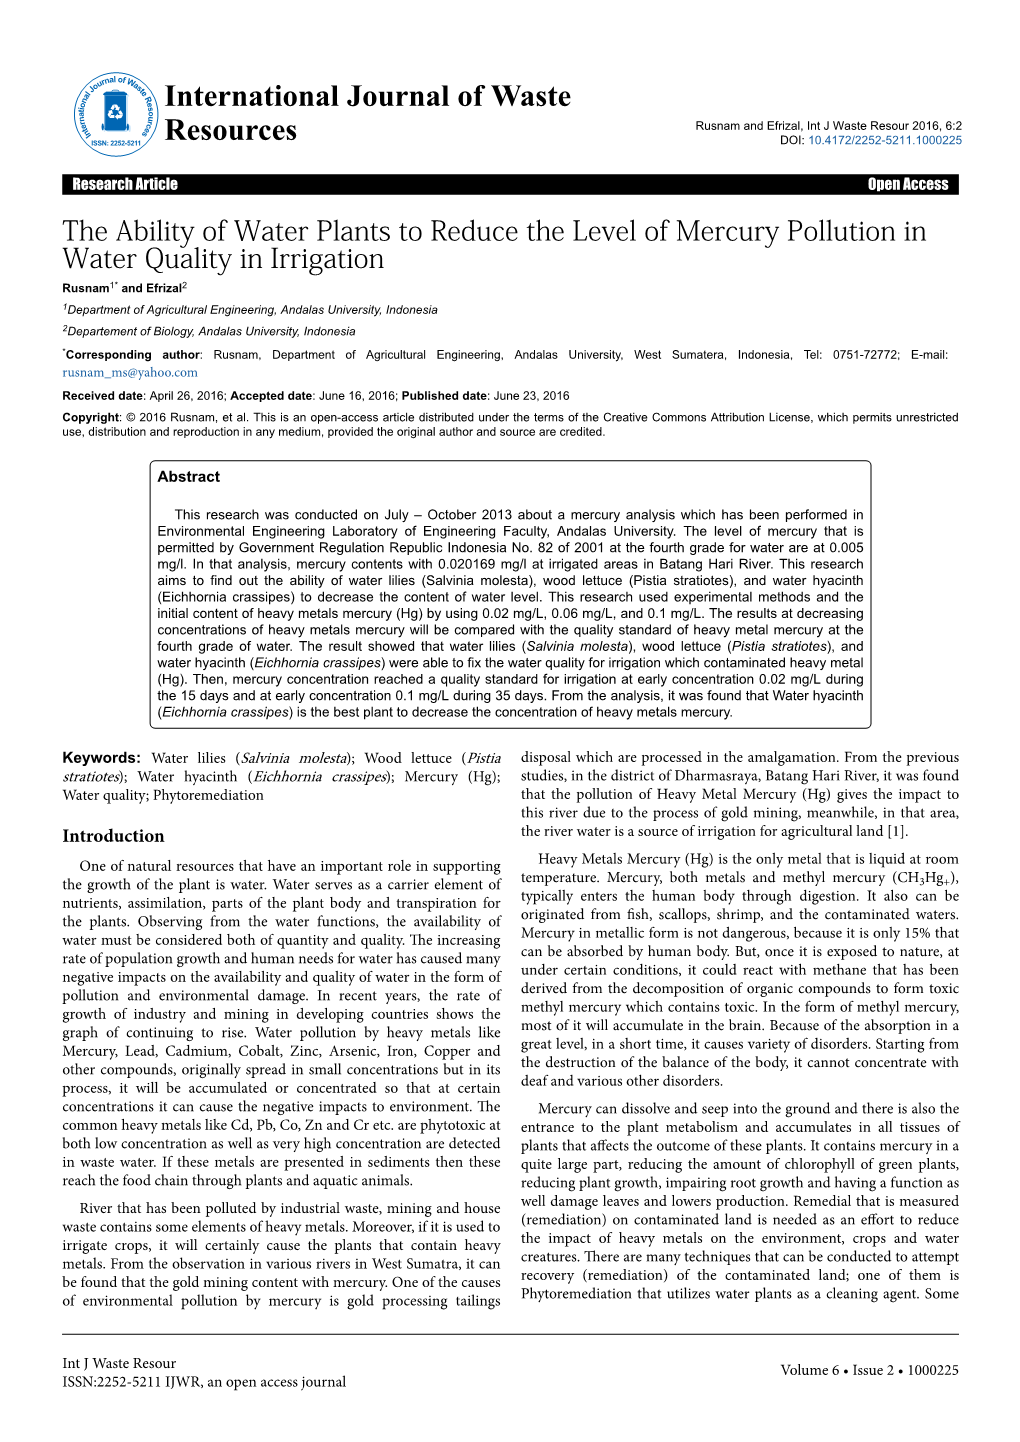 The Ability of Water Plants to Reduce the Level of Mercury Pollution In